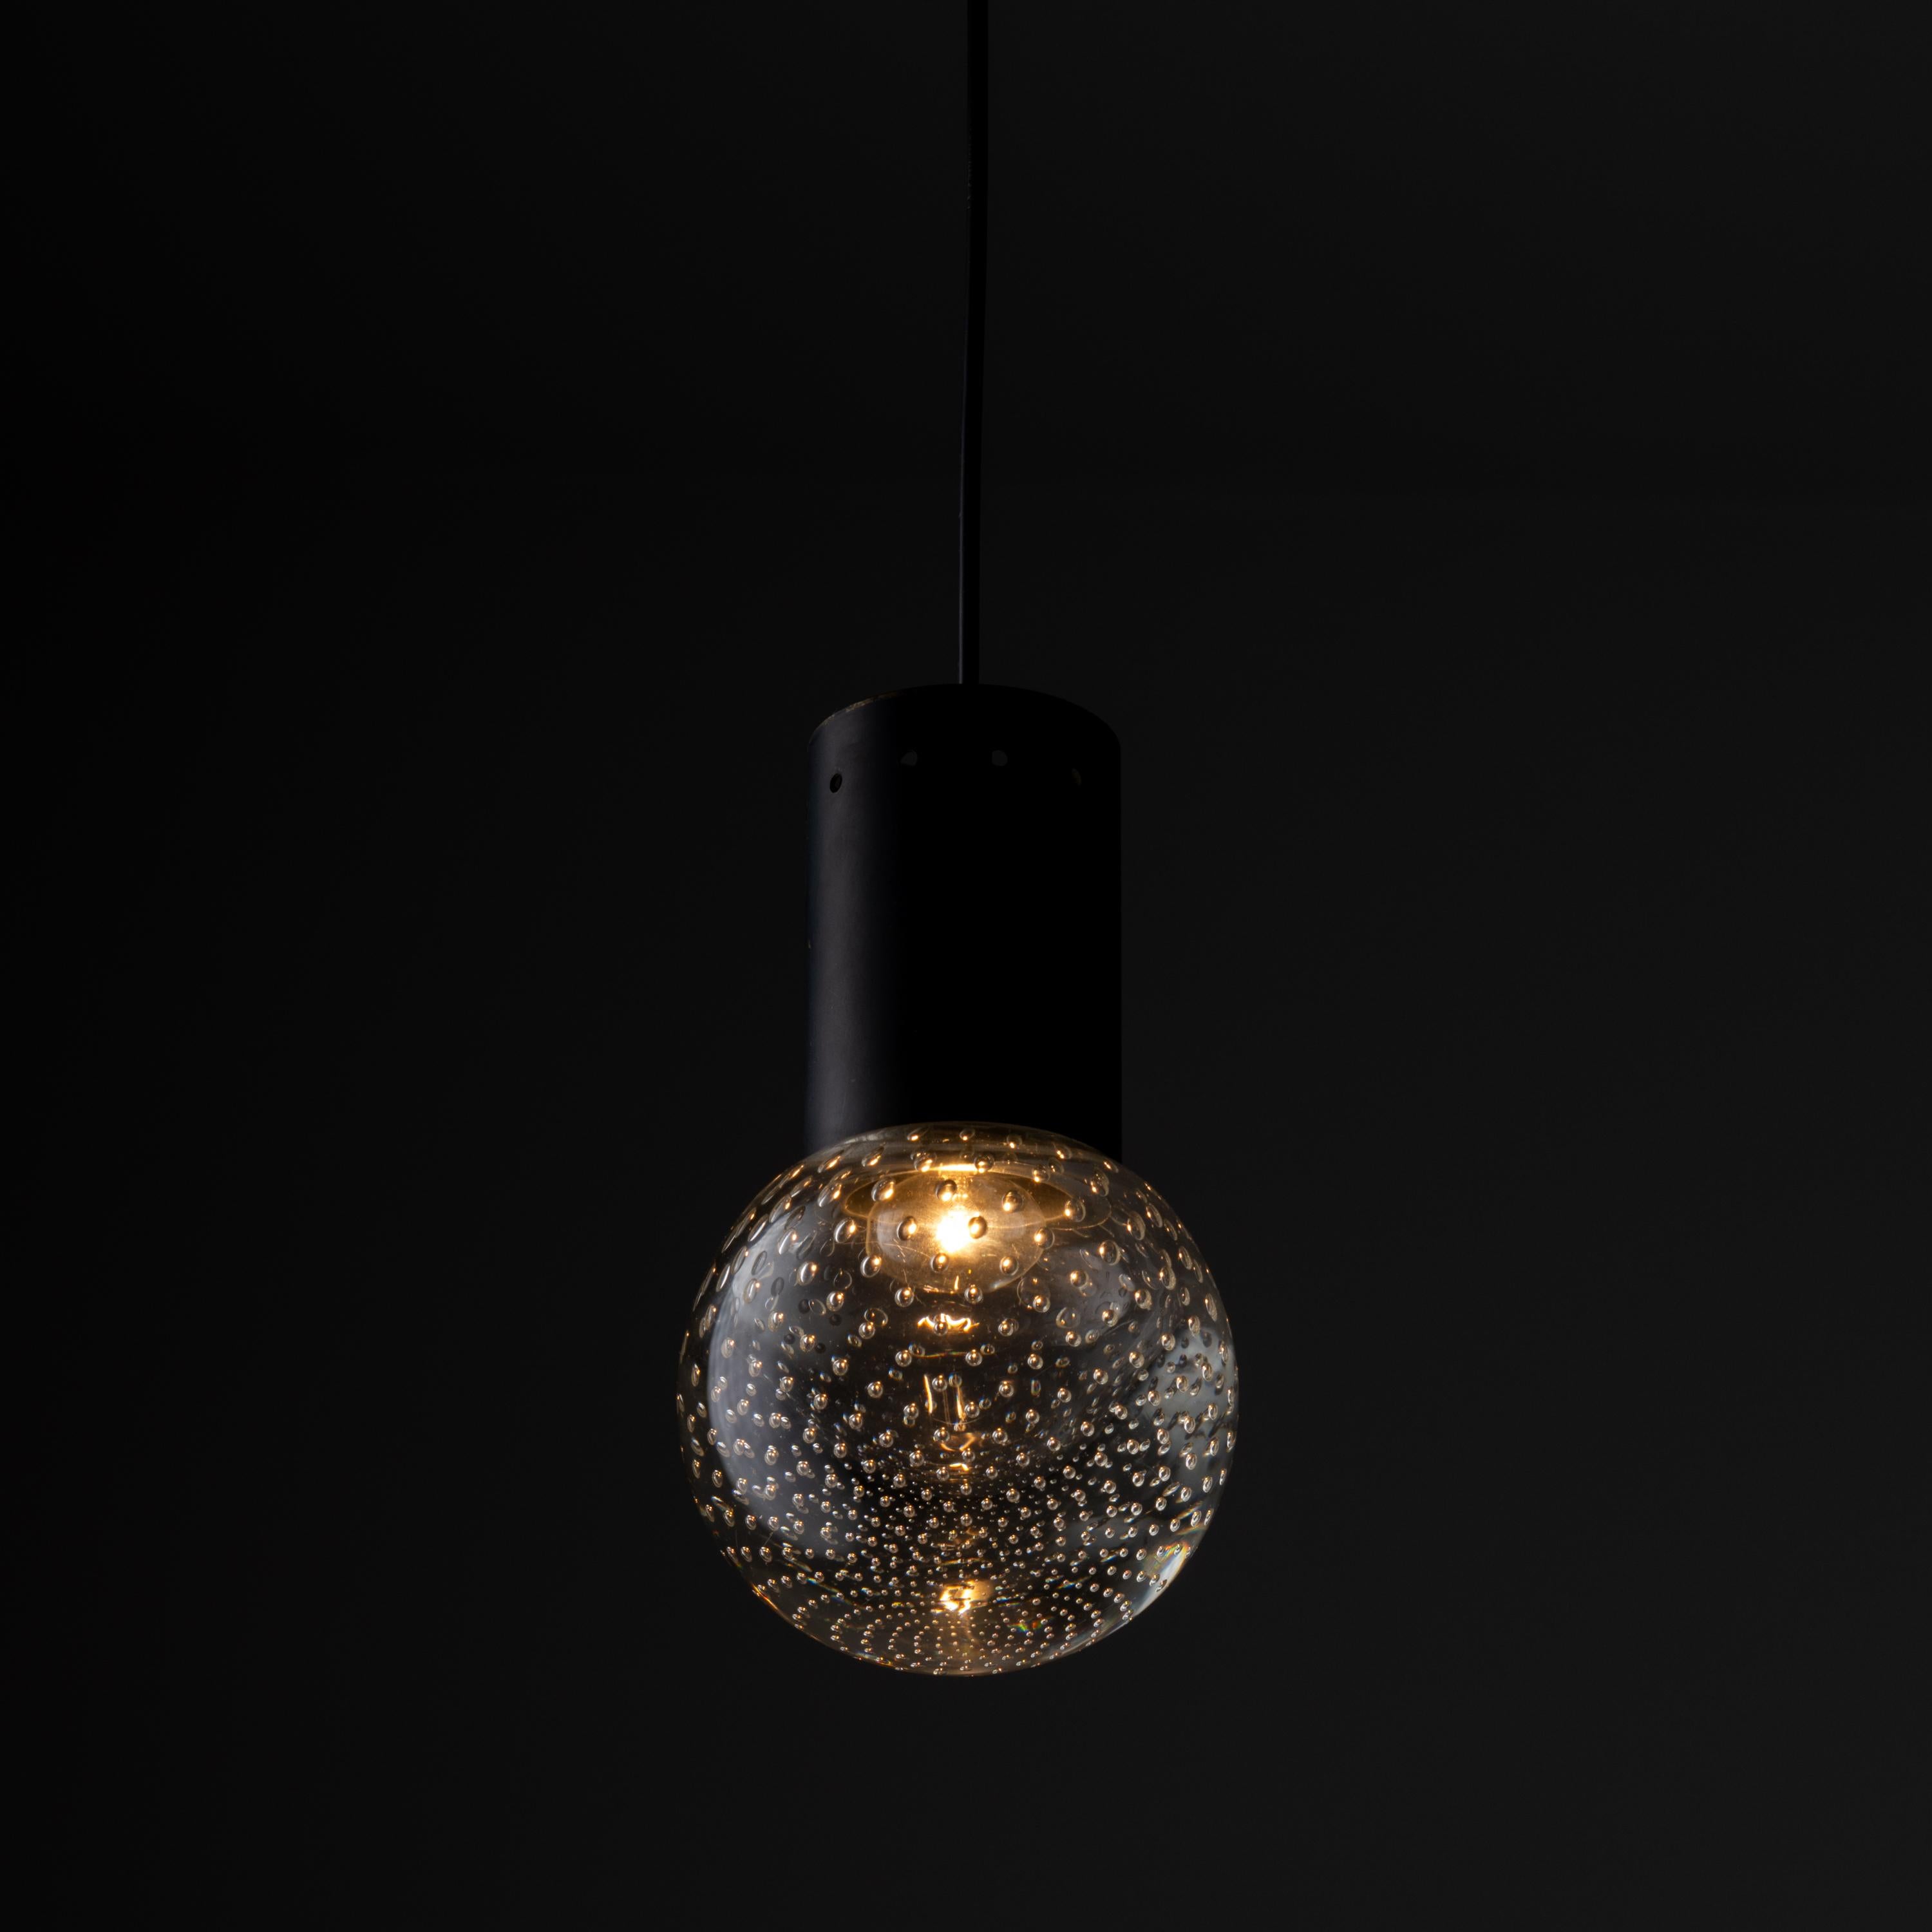 Seguso Glass Pendants by Gino Sarfatti for Arteluce. Designed and manufactured in Italy, circa the 1960s. Executed in hand blown bubbled Seguso glass and painted metal. This simple design, focuses on the striking glass once illuminated, allowing for